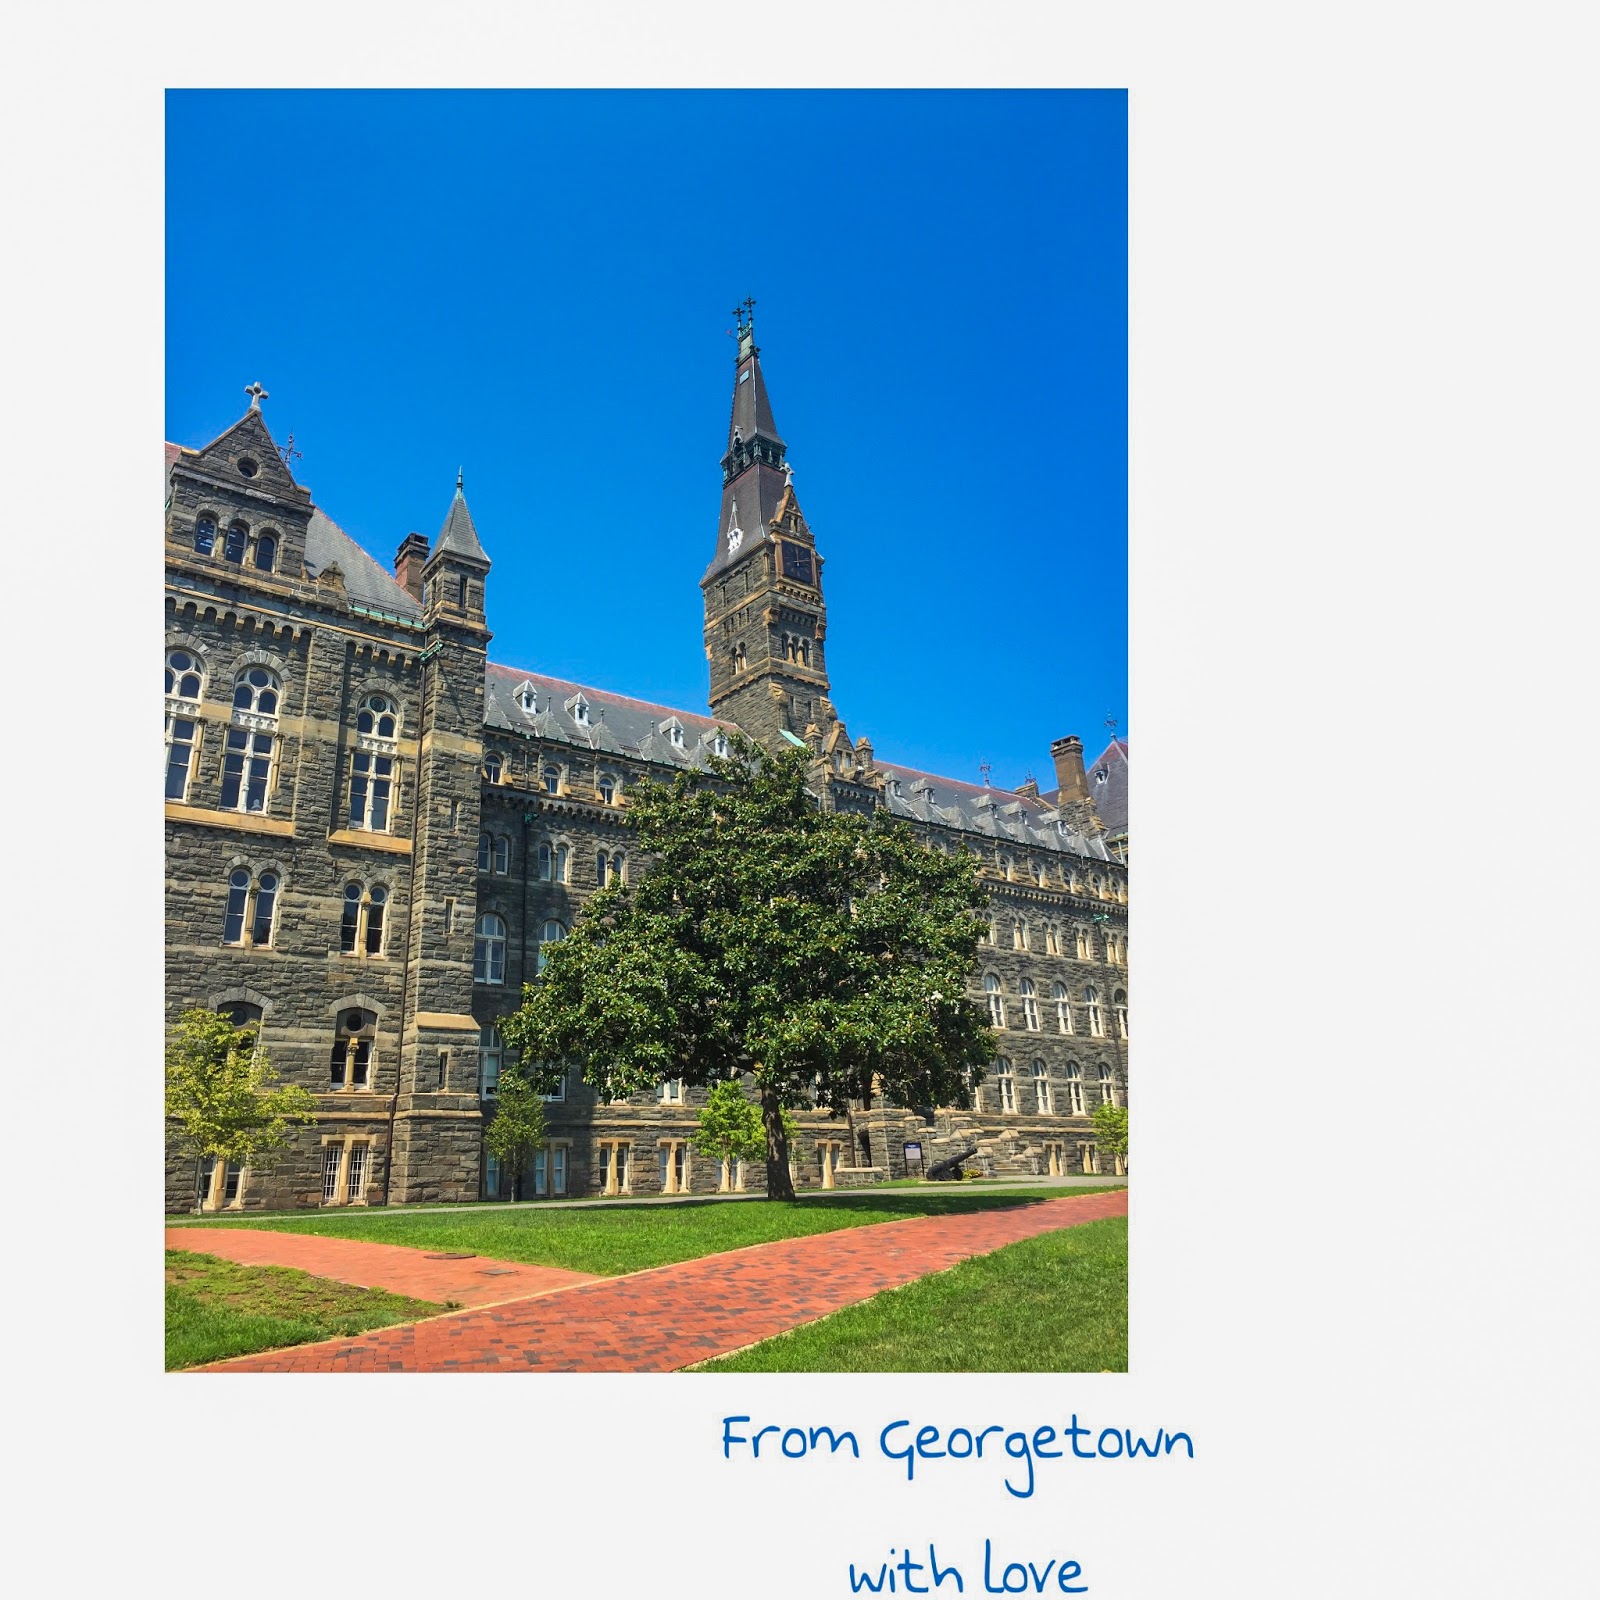 FIRST WEEK GEORGETOWN EXPERIENCE: THOSE WHO WANDER ARE LOST!